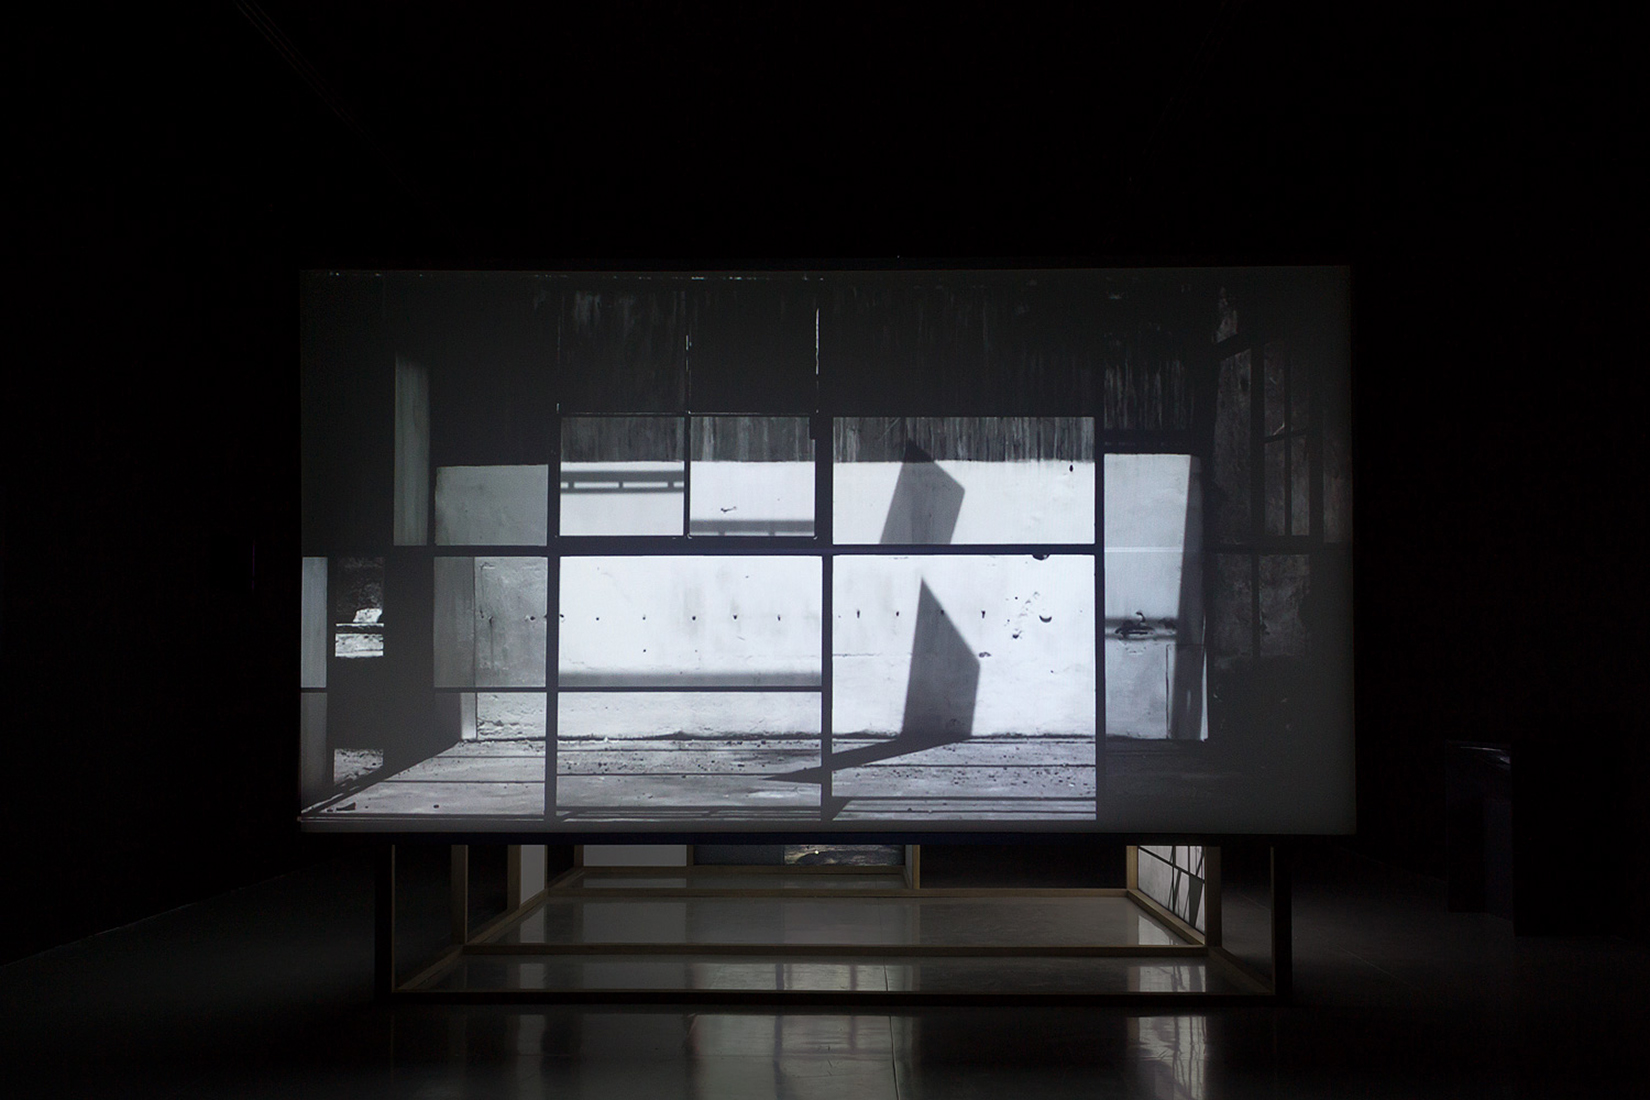    Nada más que las horas , 2013.  Five channel video installation at MAZ Museum. Wood, Formica and polyester screens.300 x 425 x 220 cm. 